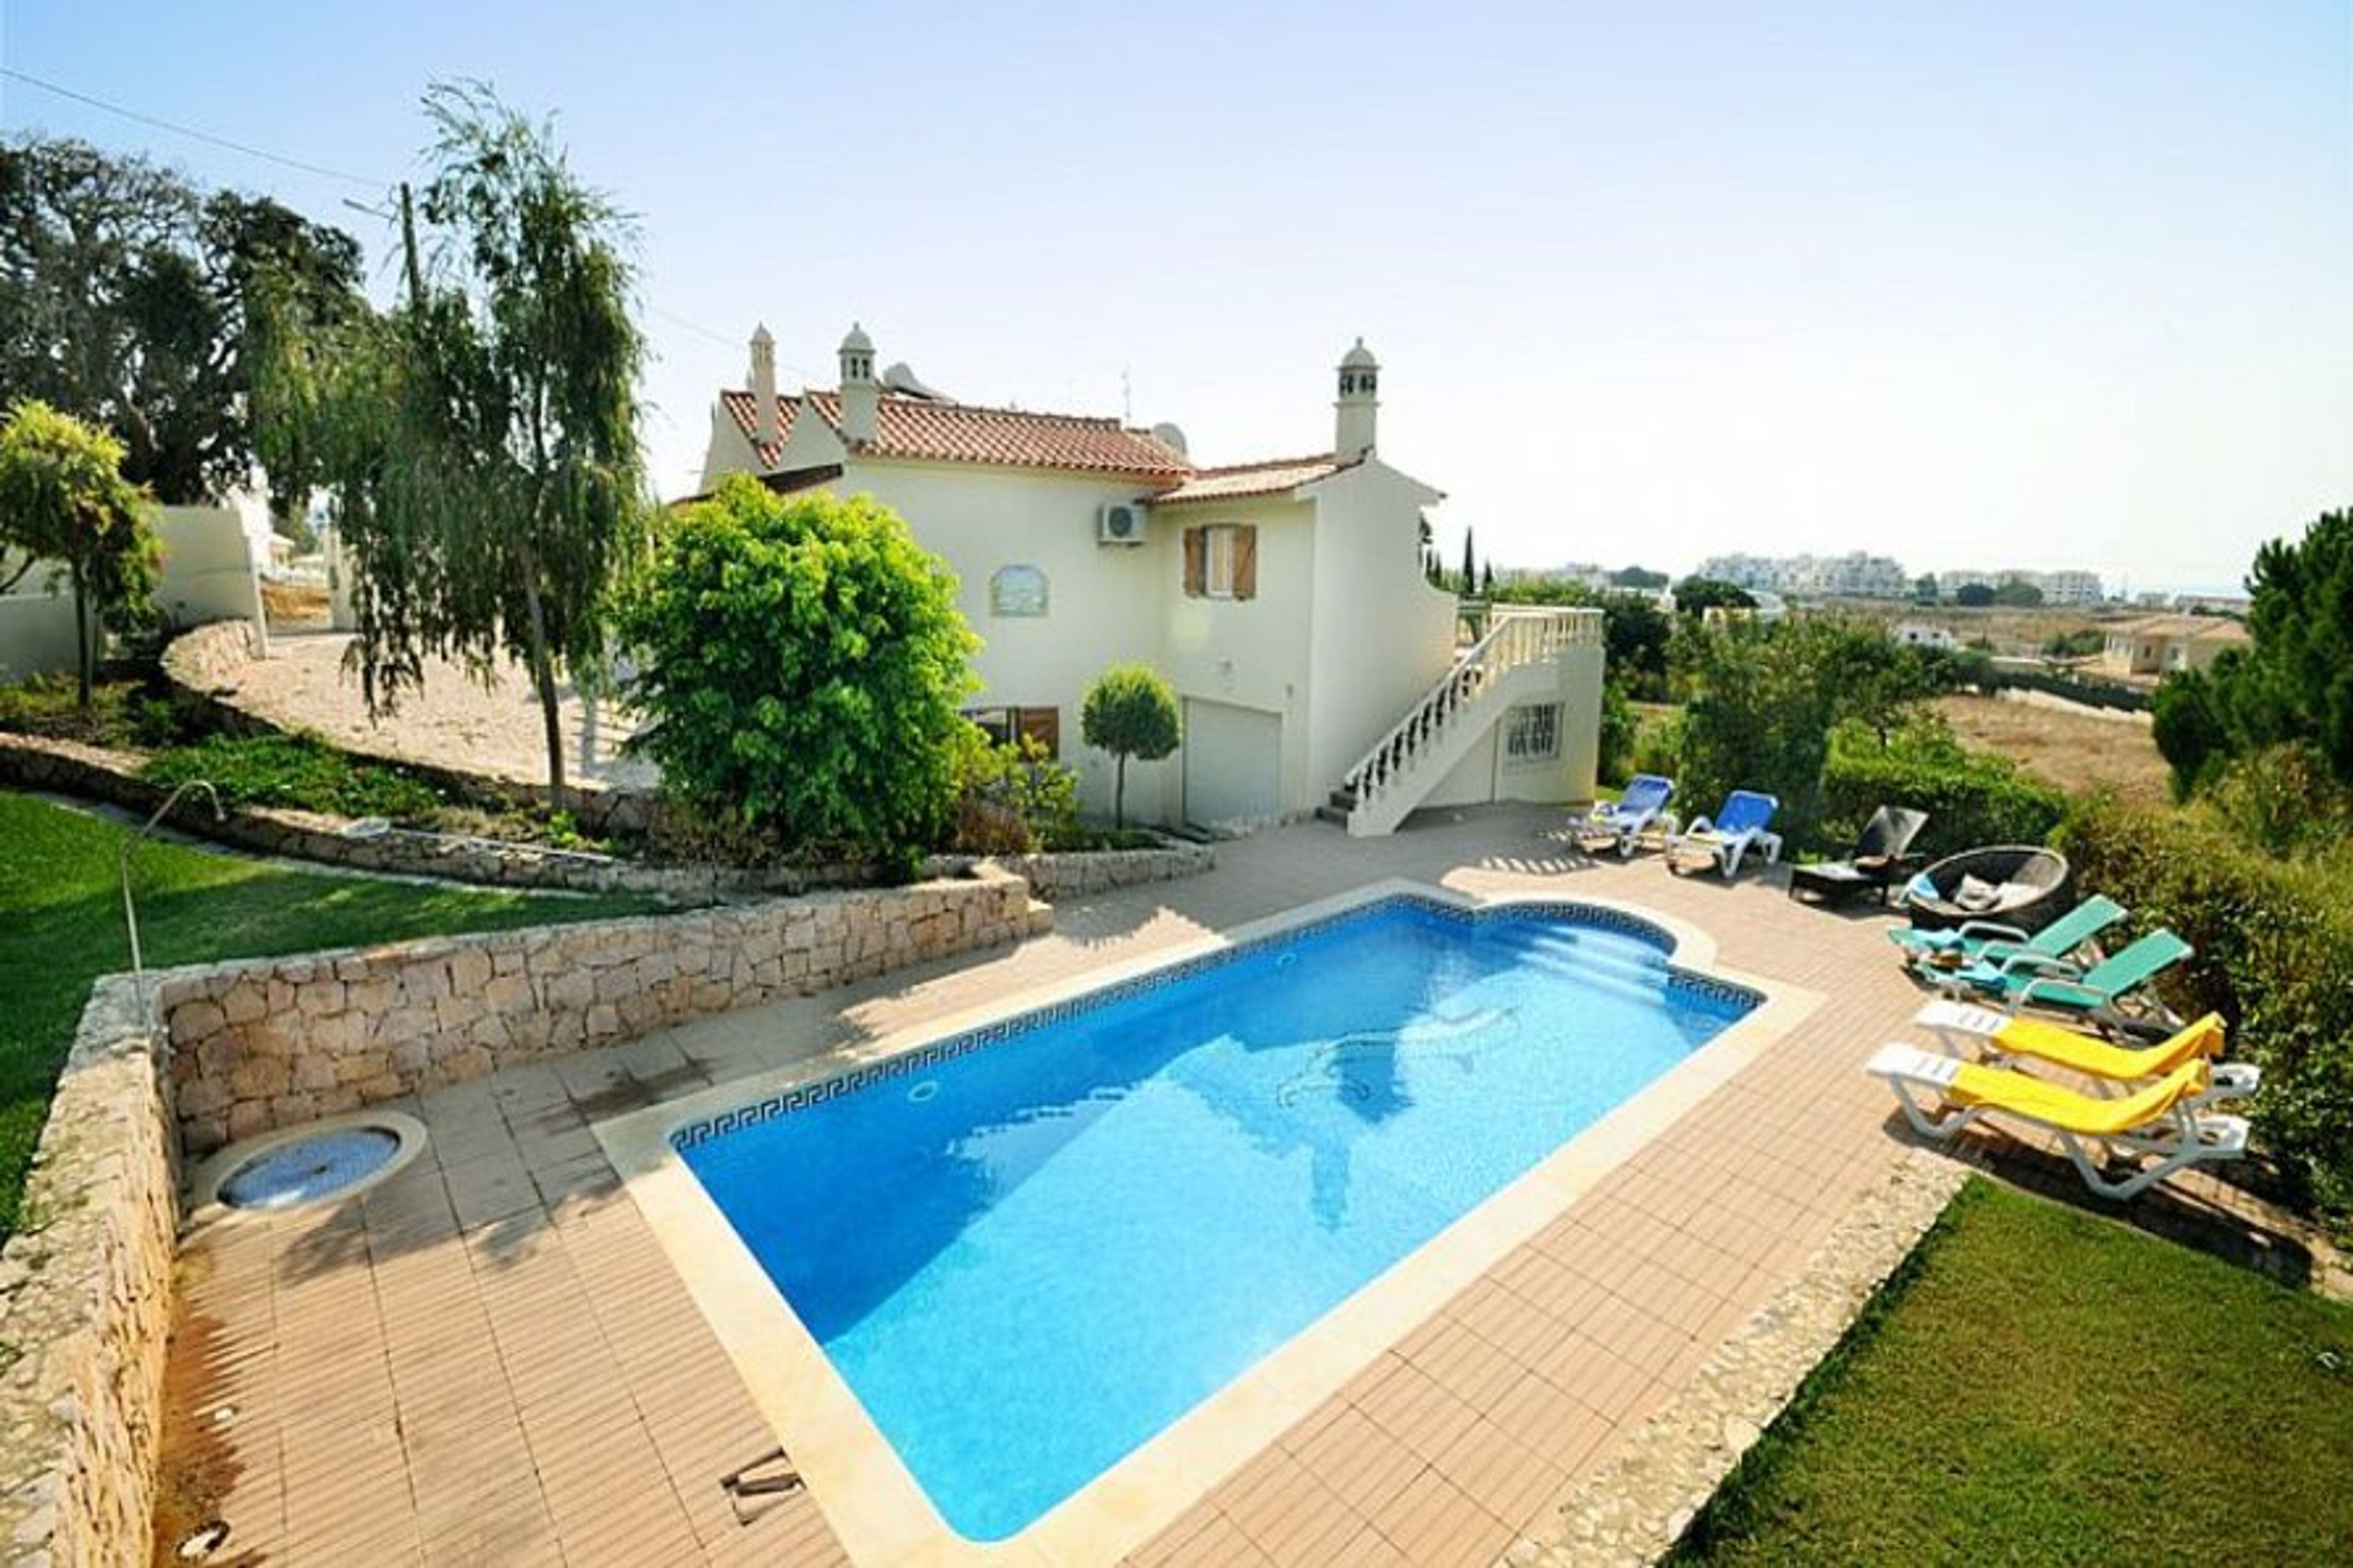 Villa Torre with Large private pool and Garden area